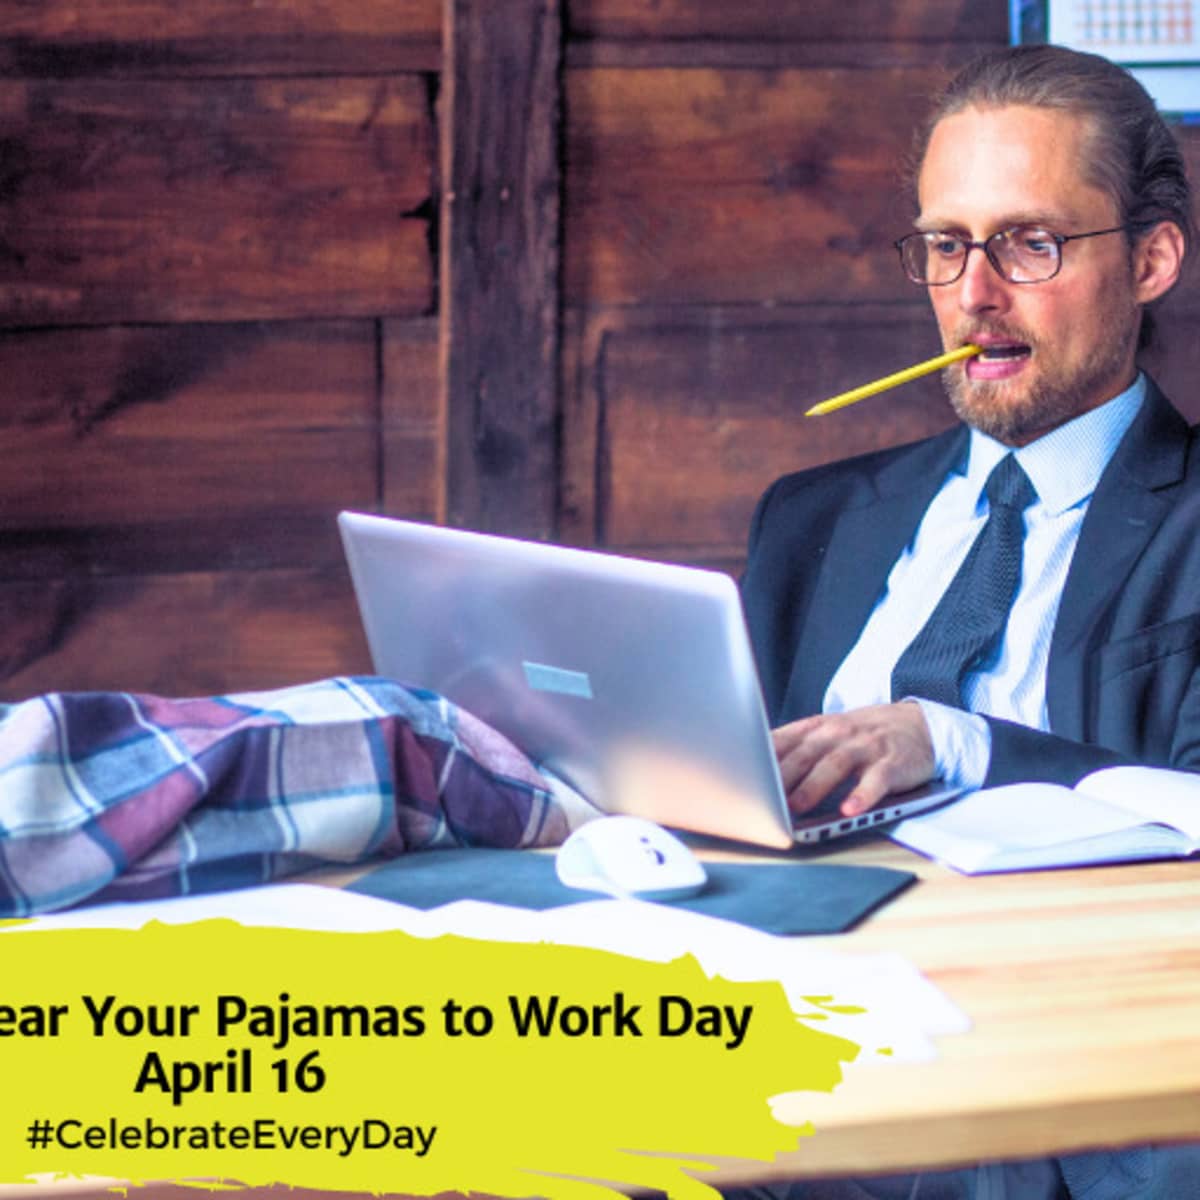 NATIONAL WEAR YOUR PAJAMAS TO WORK DAY - April 16 - National Day Calendar